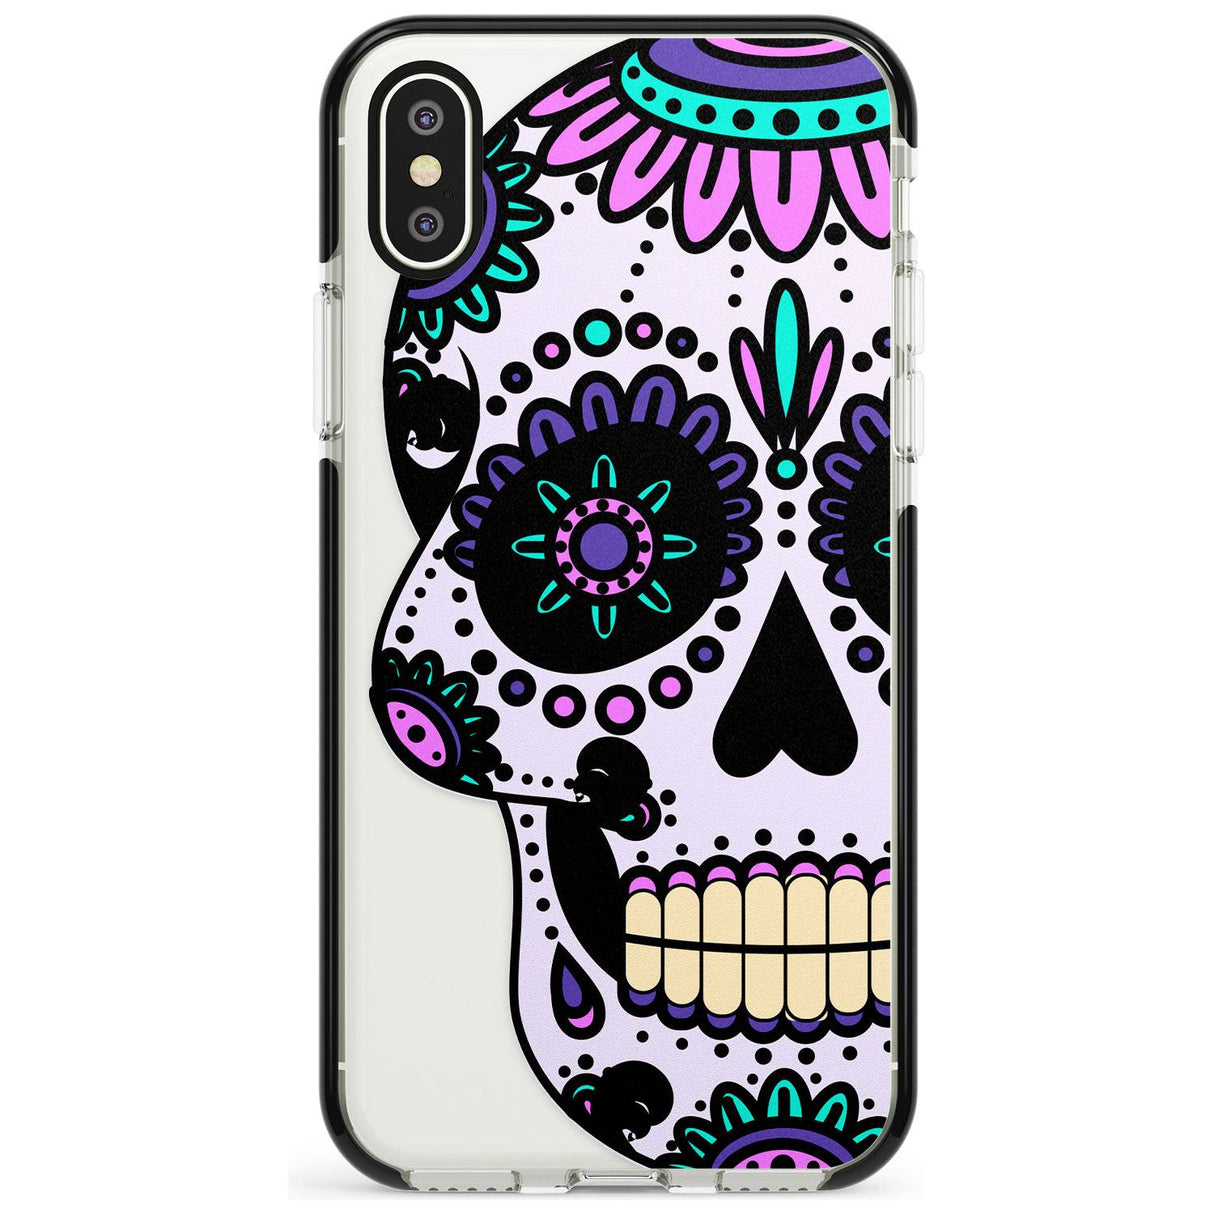 Violet Sugar Skull Black Impact Phone Case for iPhone X XS Max XR